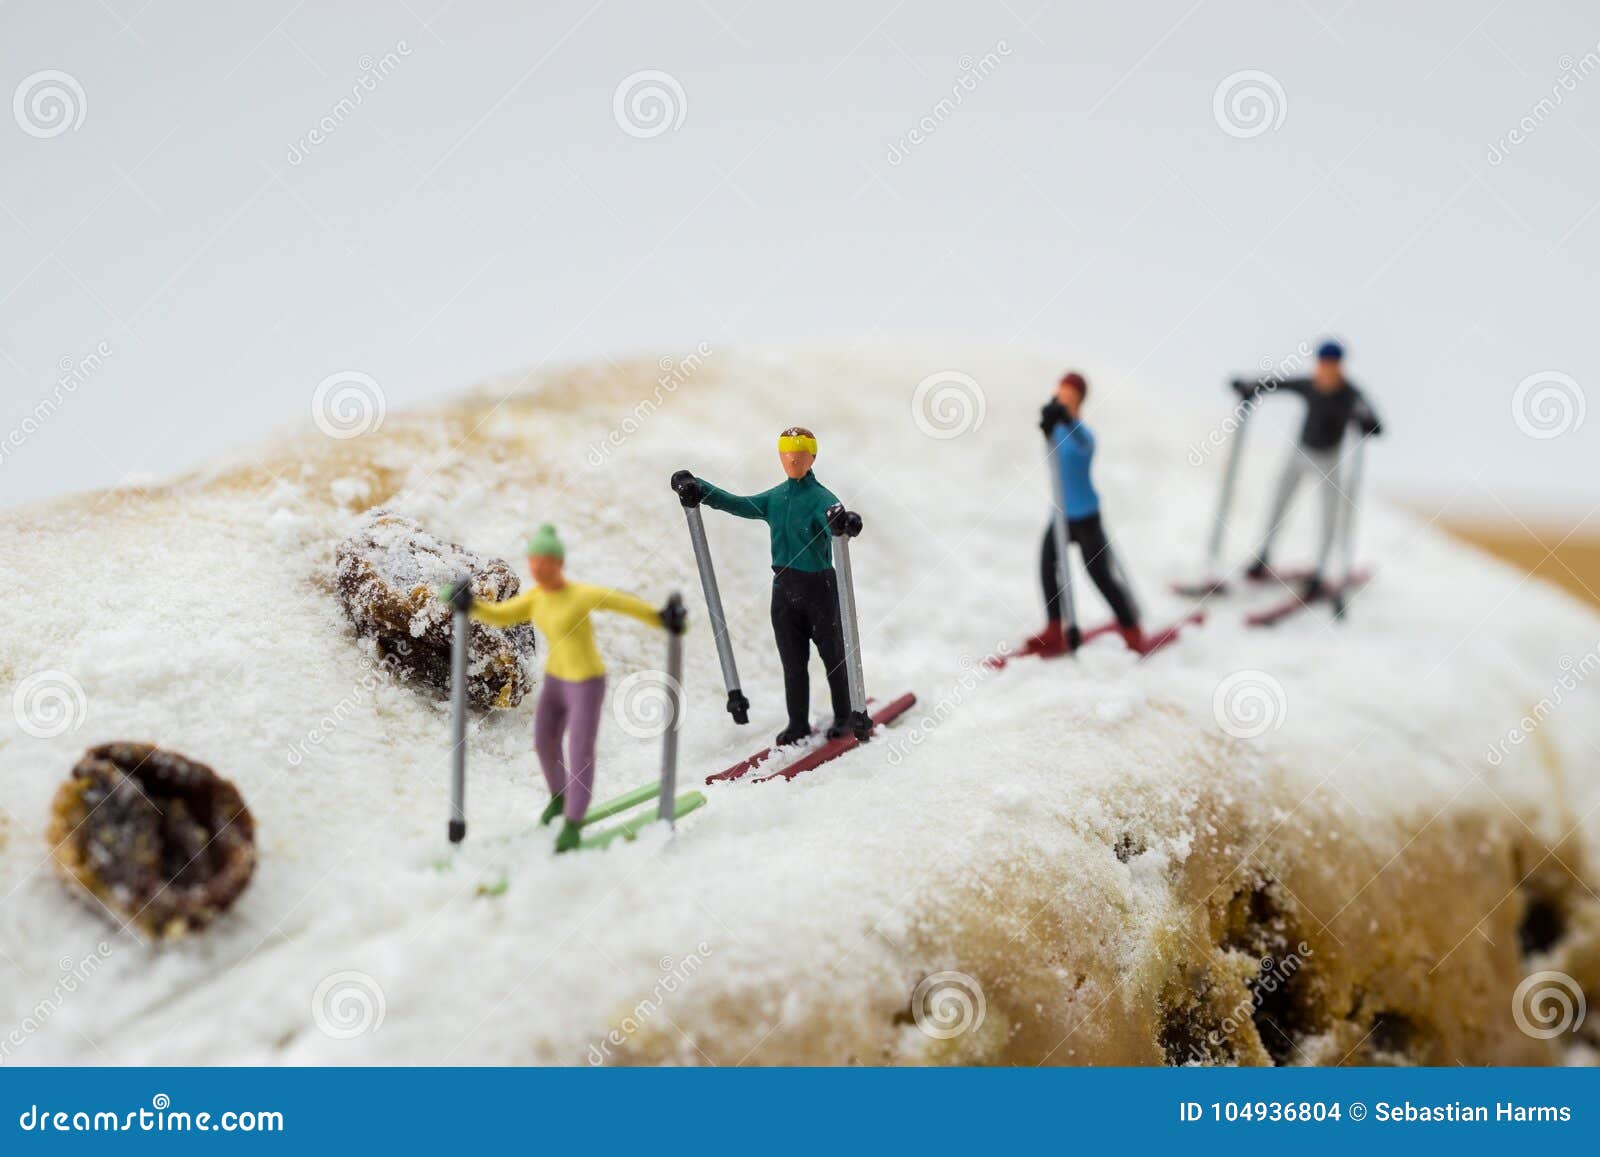 Miniature Skier Skiing on a Cake Stock Photo - Image of nature, outdoor:  104936804